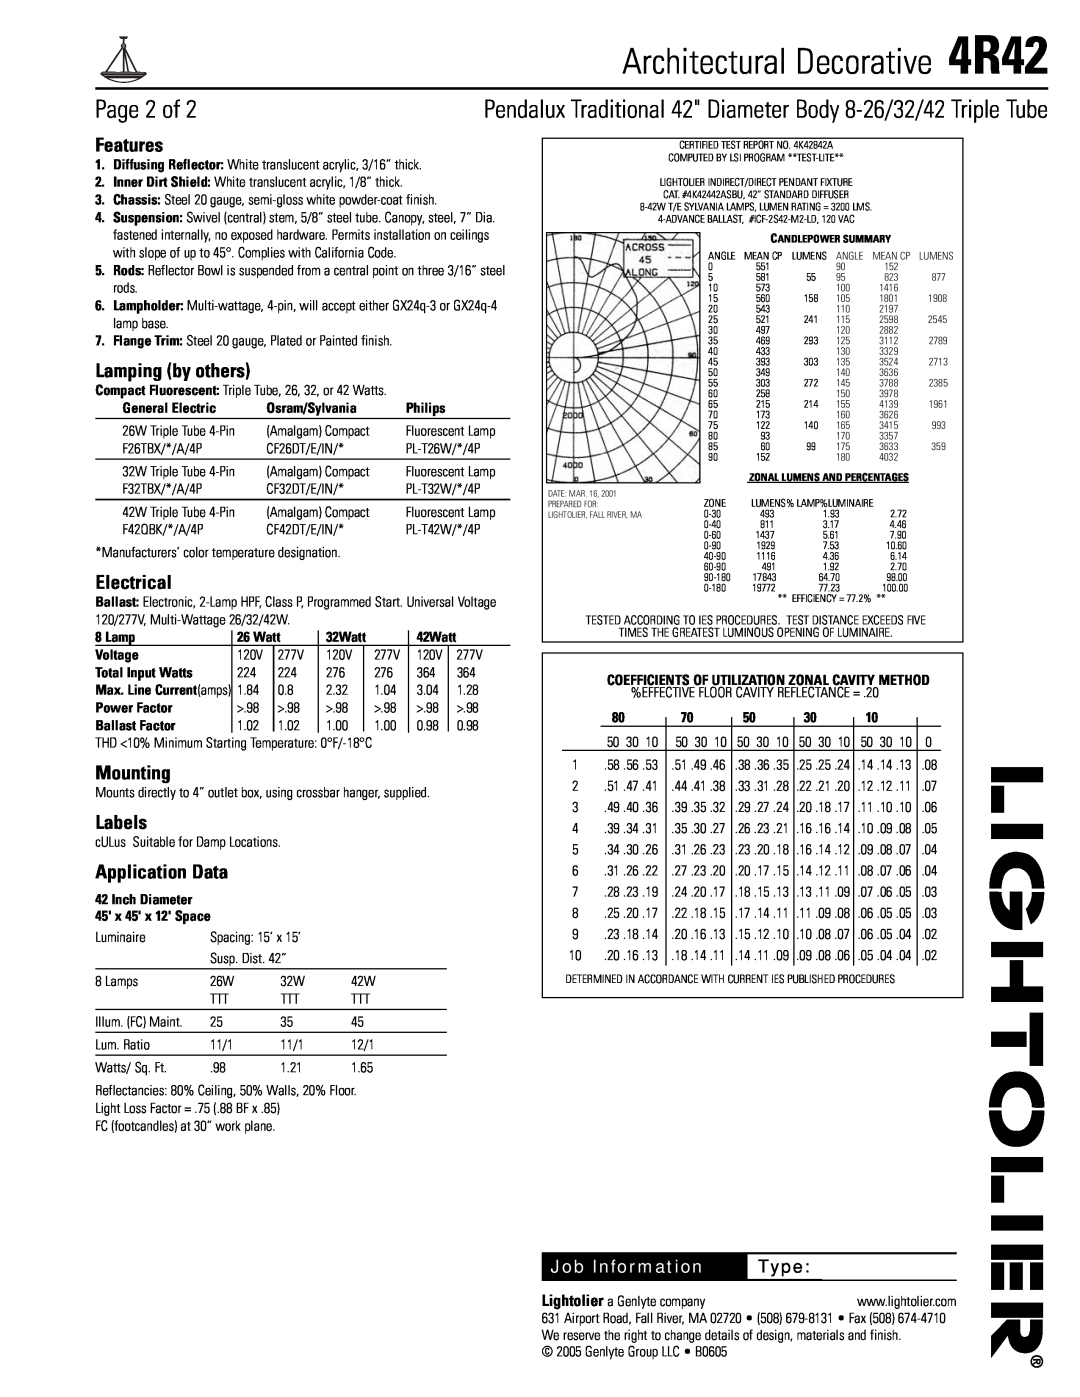 Lightolier 4R42 specifications Page 2 of, Features, Lamping by others, Electrical, Mounting, Labels, Application Data, Type 